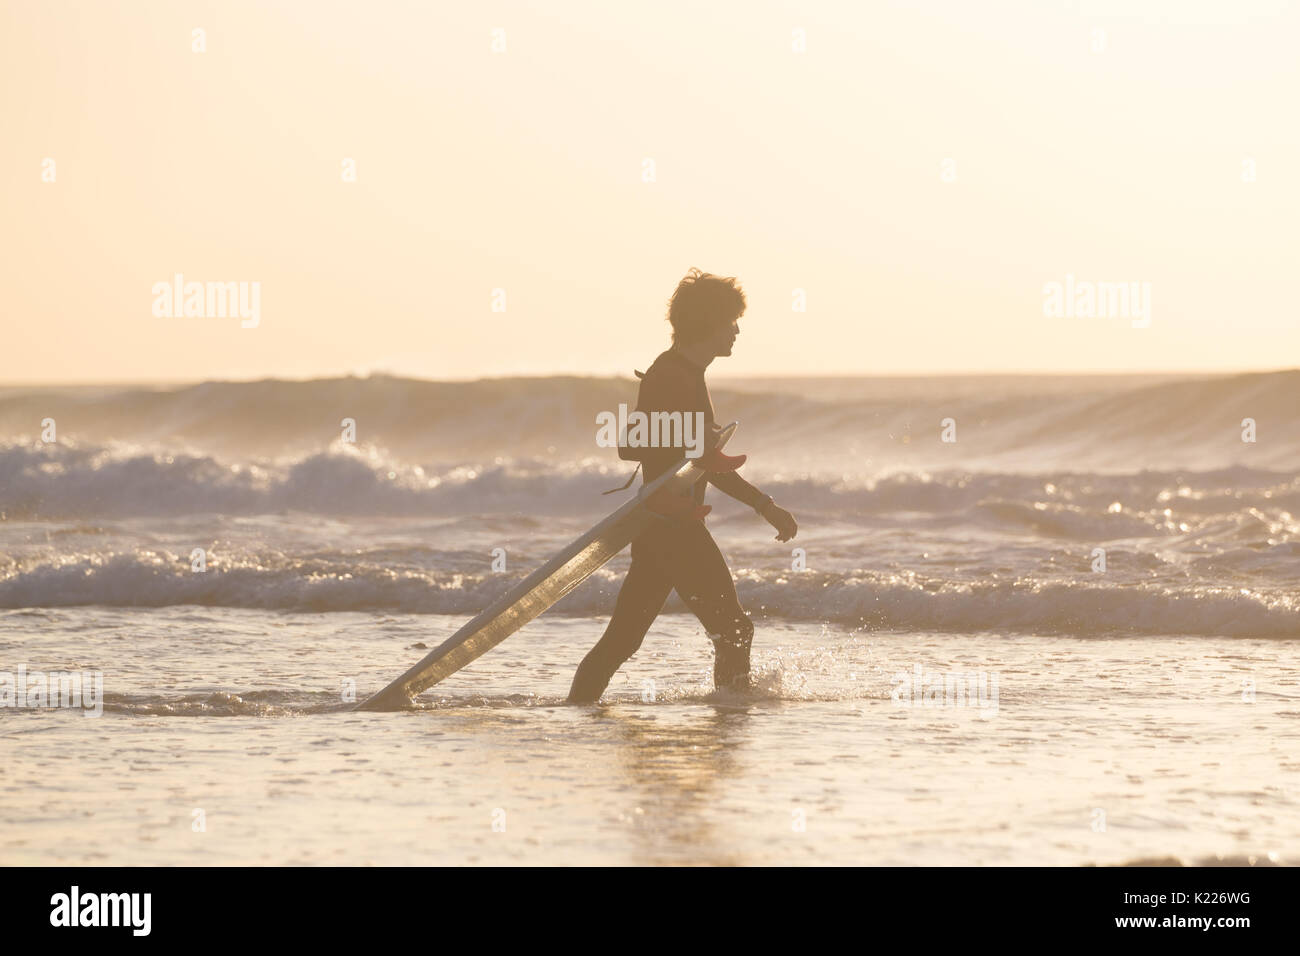 Silhouette of surfer on beach with surfboard. Stock Photo